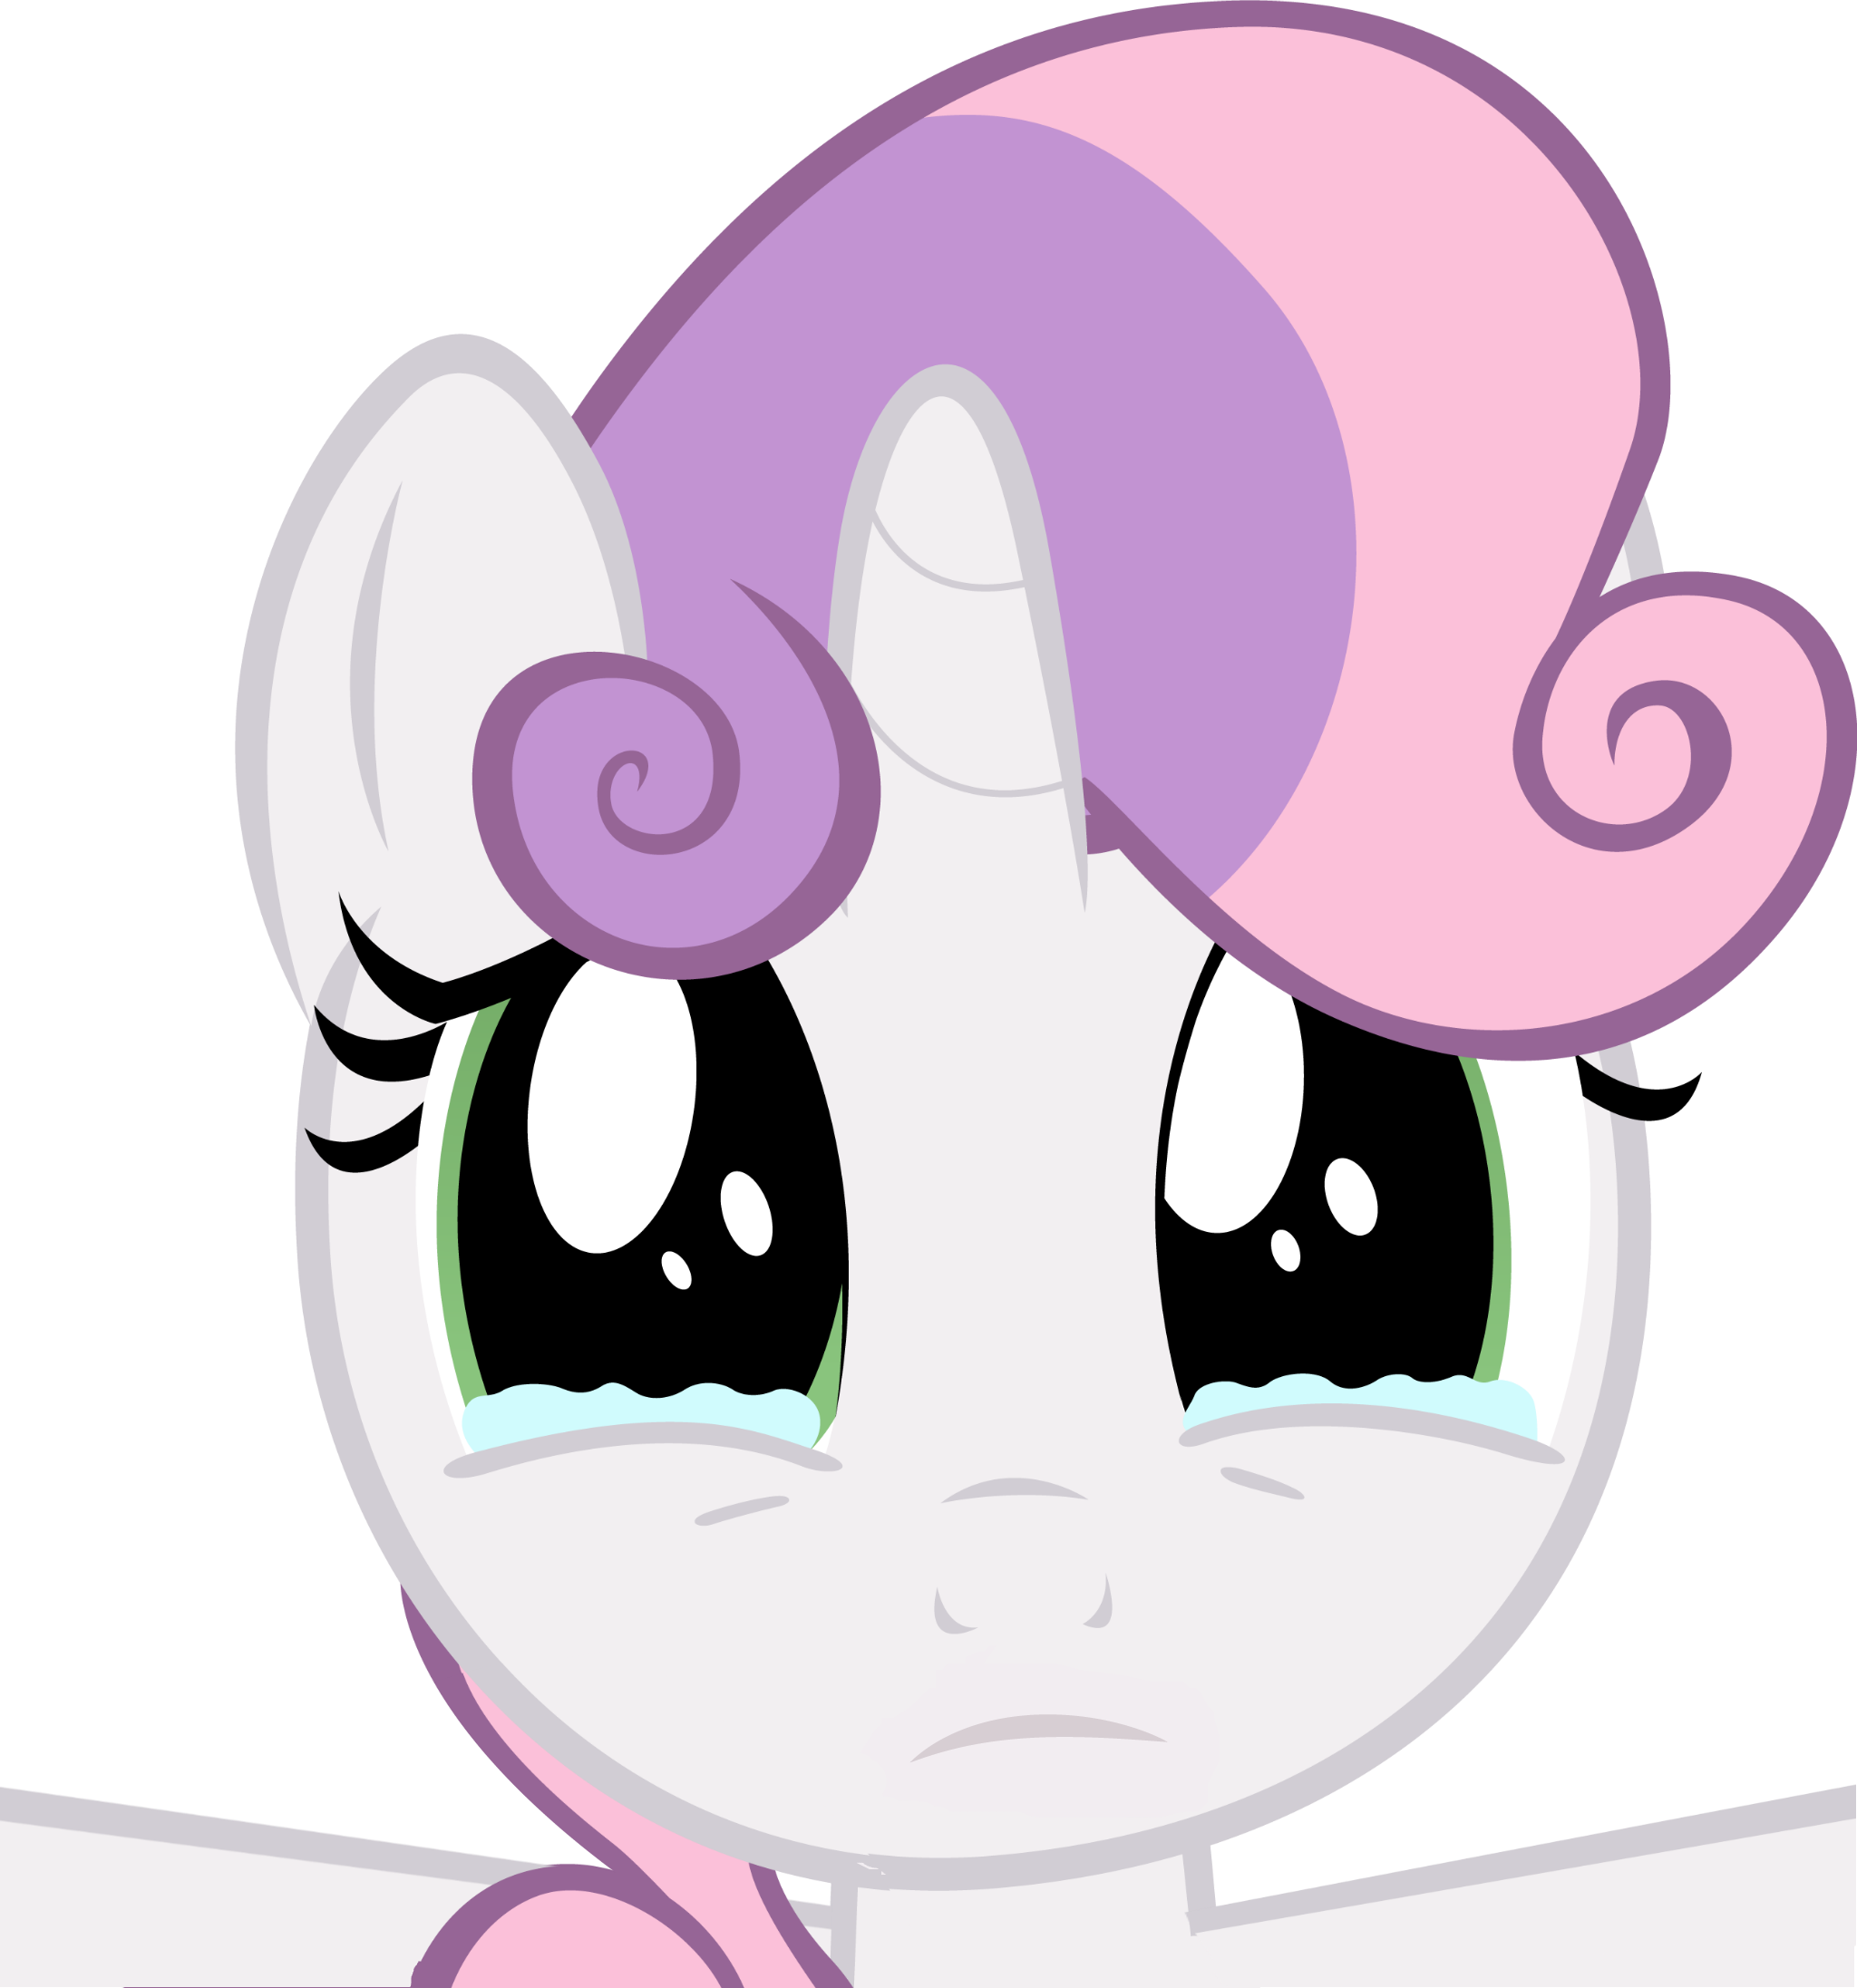 785571 Dead Source Safe Sweetie Belle Bronybait Crying Cute Diasweetes Female Hugs 